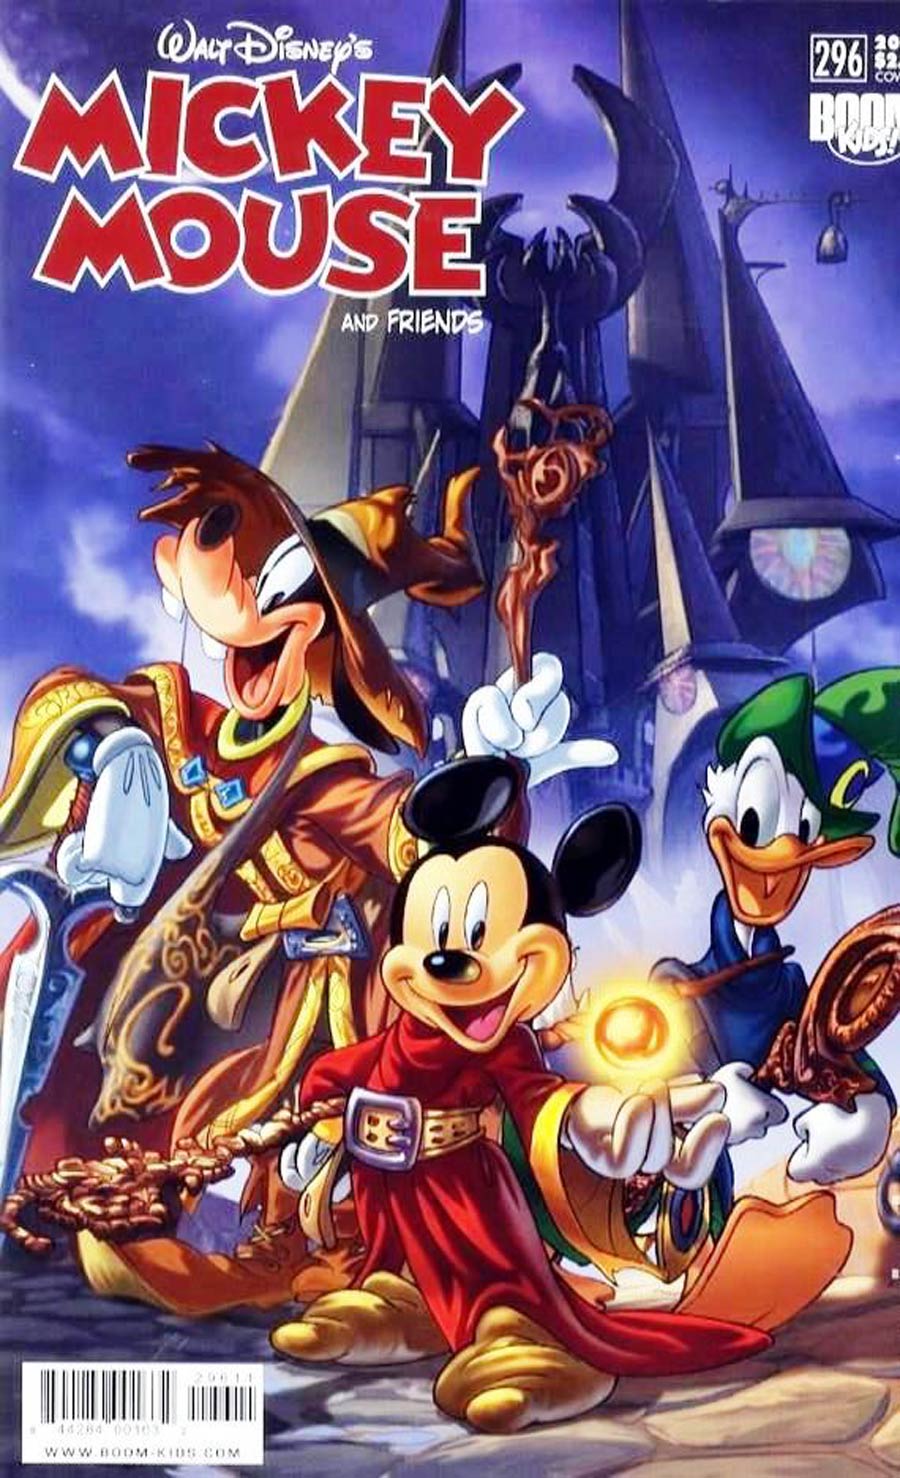 Mickey Mouse And Friends #296 Cover A 1st Ptg Regular